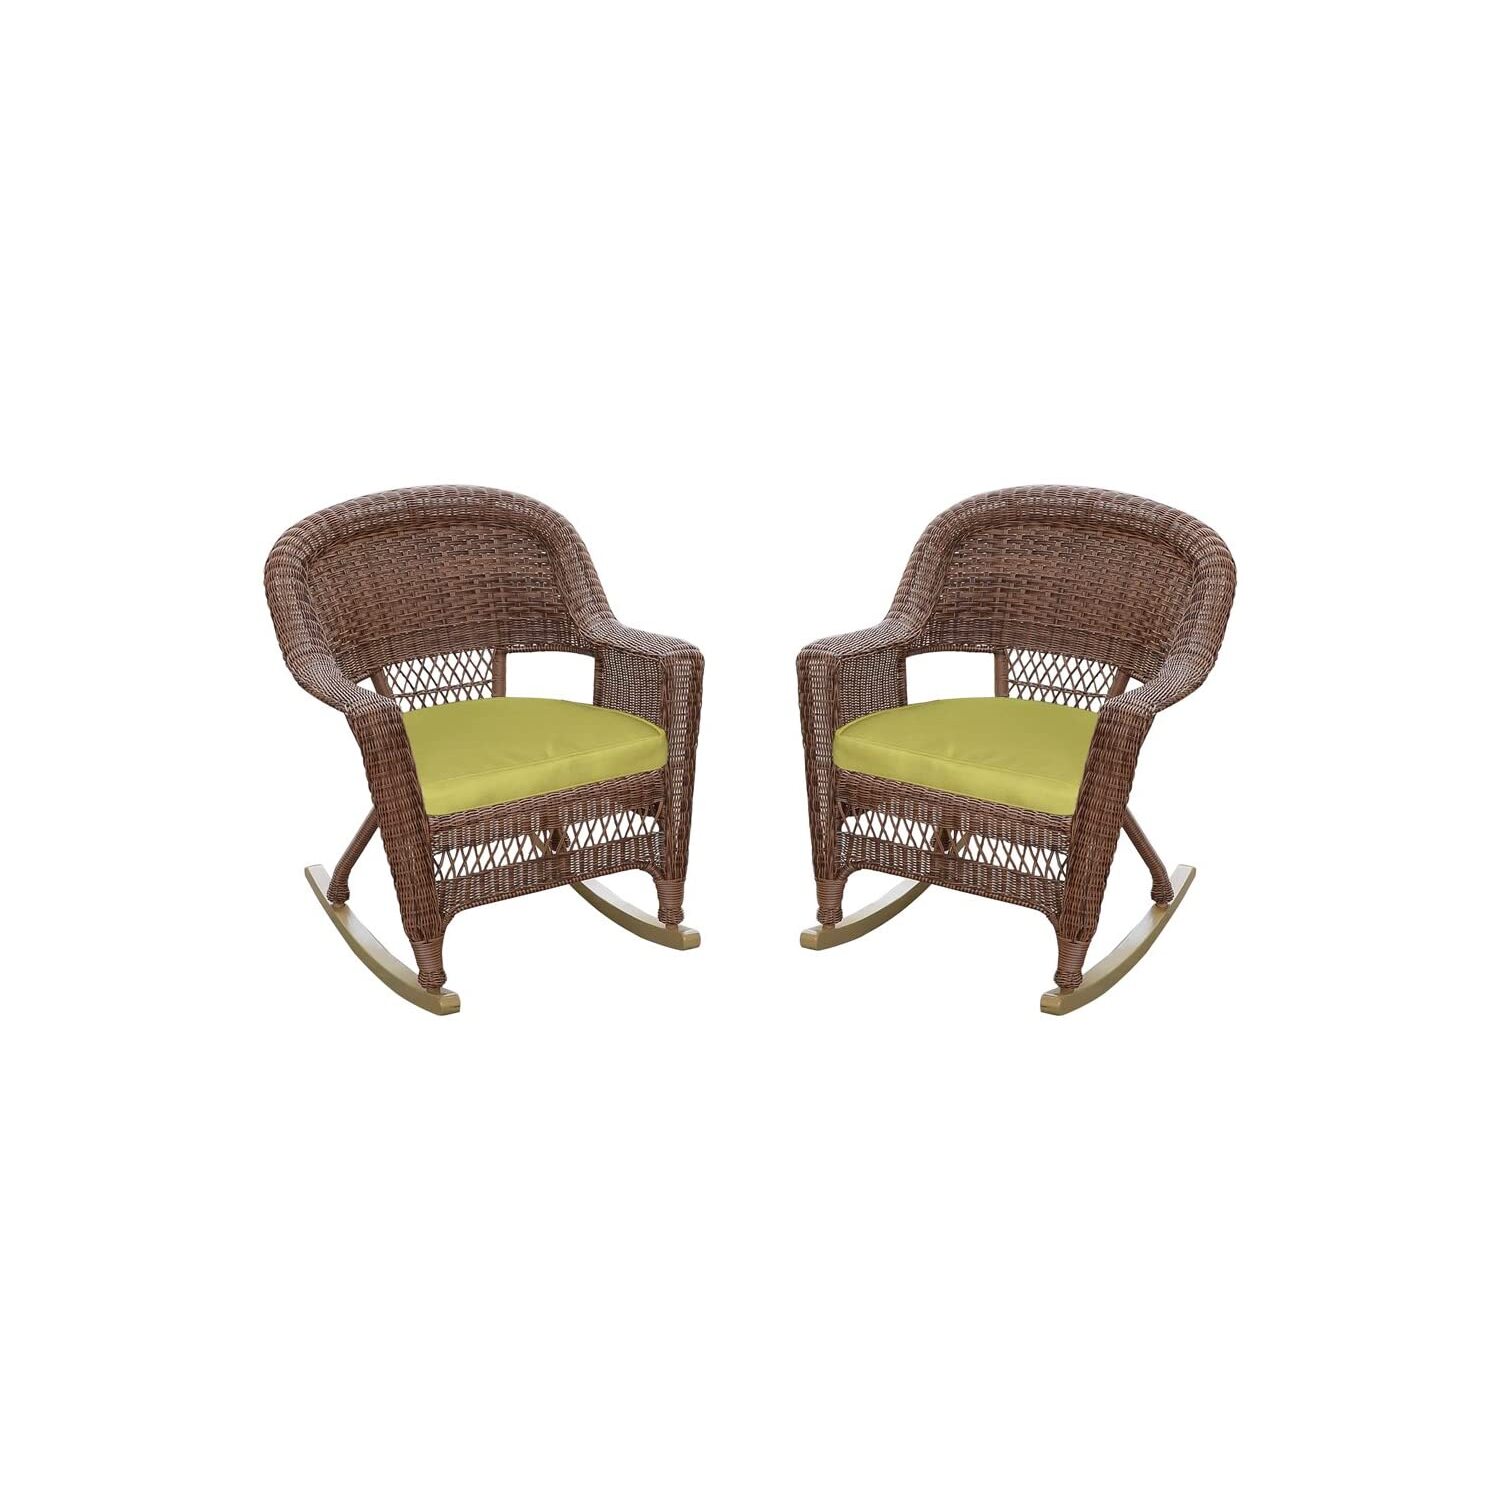 Jeco Rocker Wicker Chair with Green Cushion - Set of 2-Finish:Honey - image 1 of 1